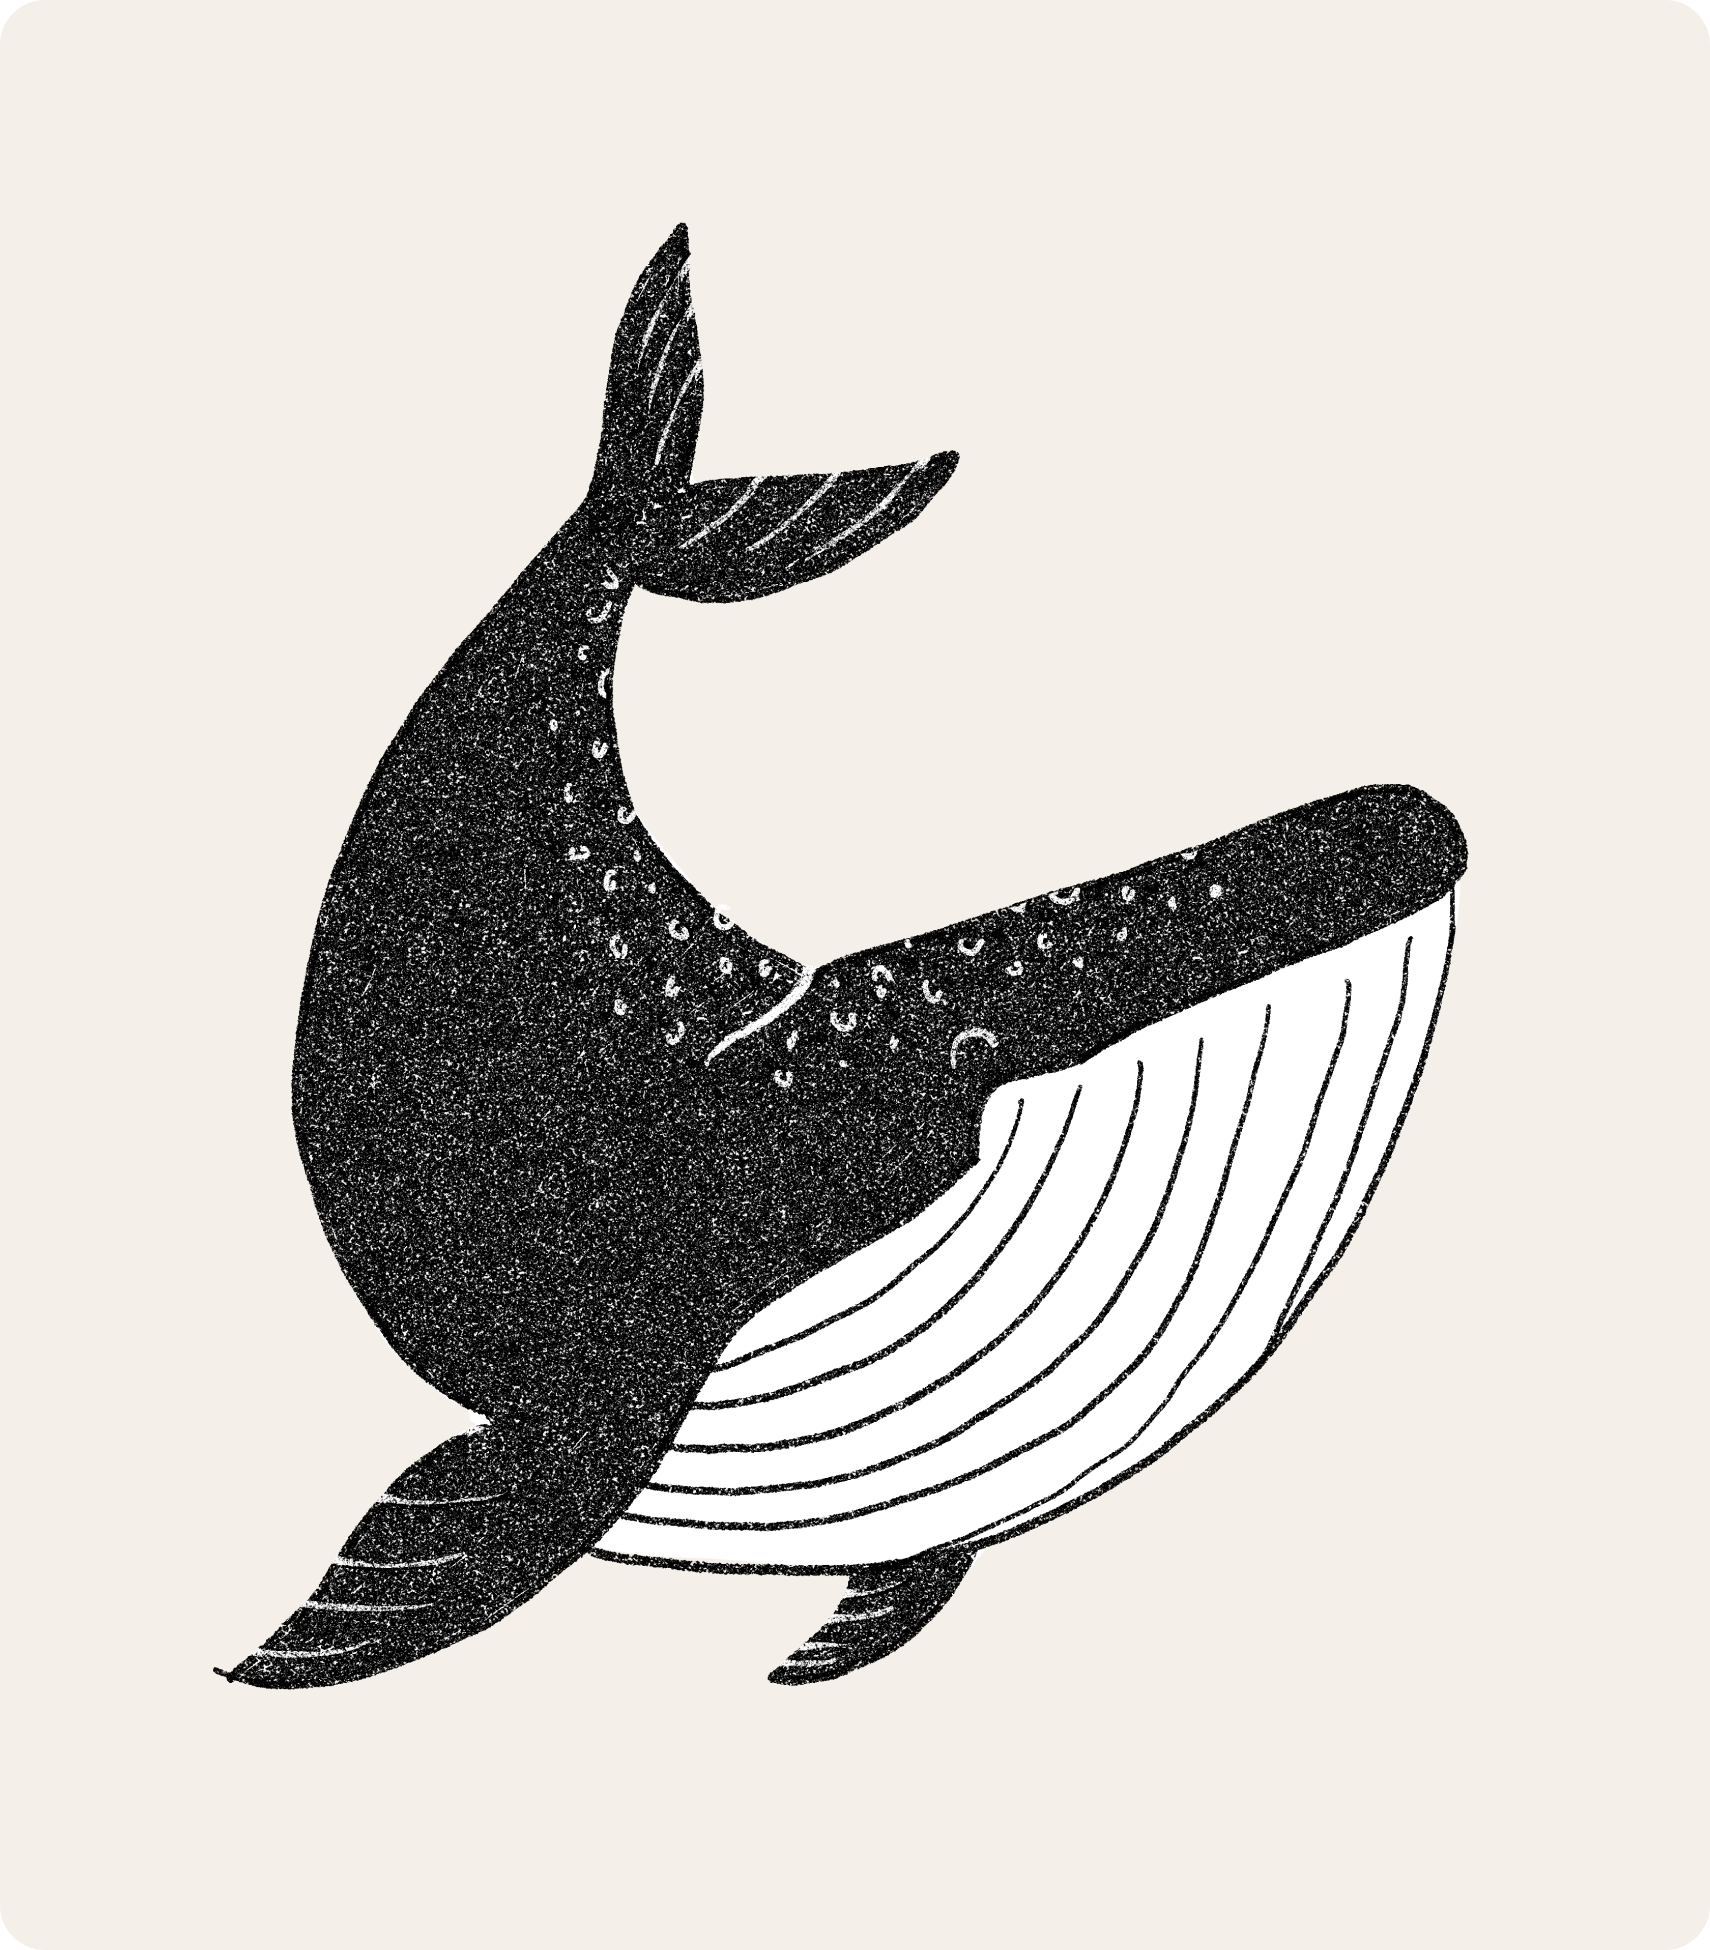 Illustration of a whale.